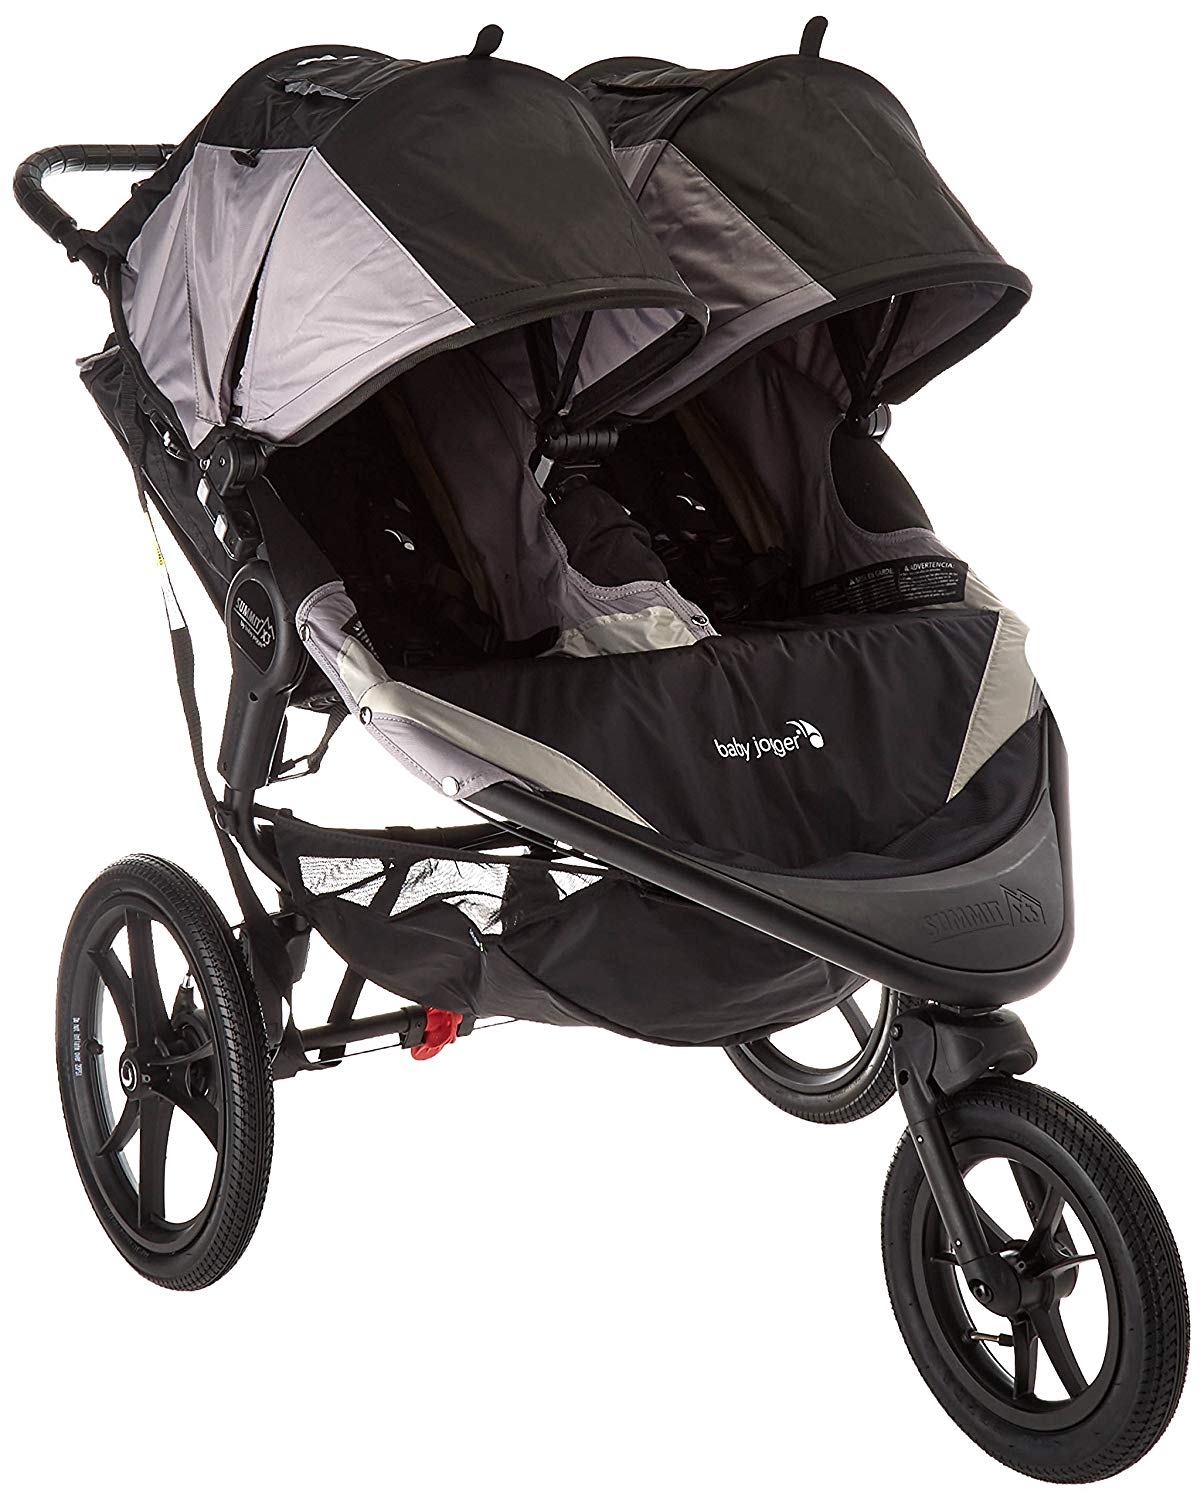 Baby X3 Double Stroller Review: a solid all-terrain